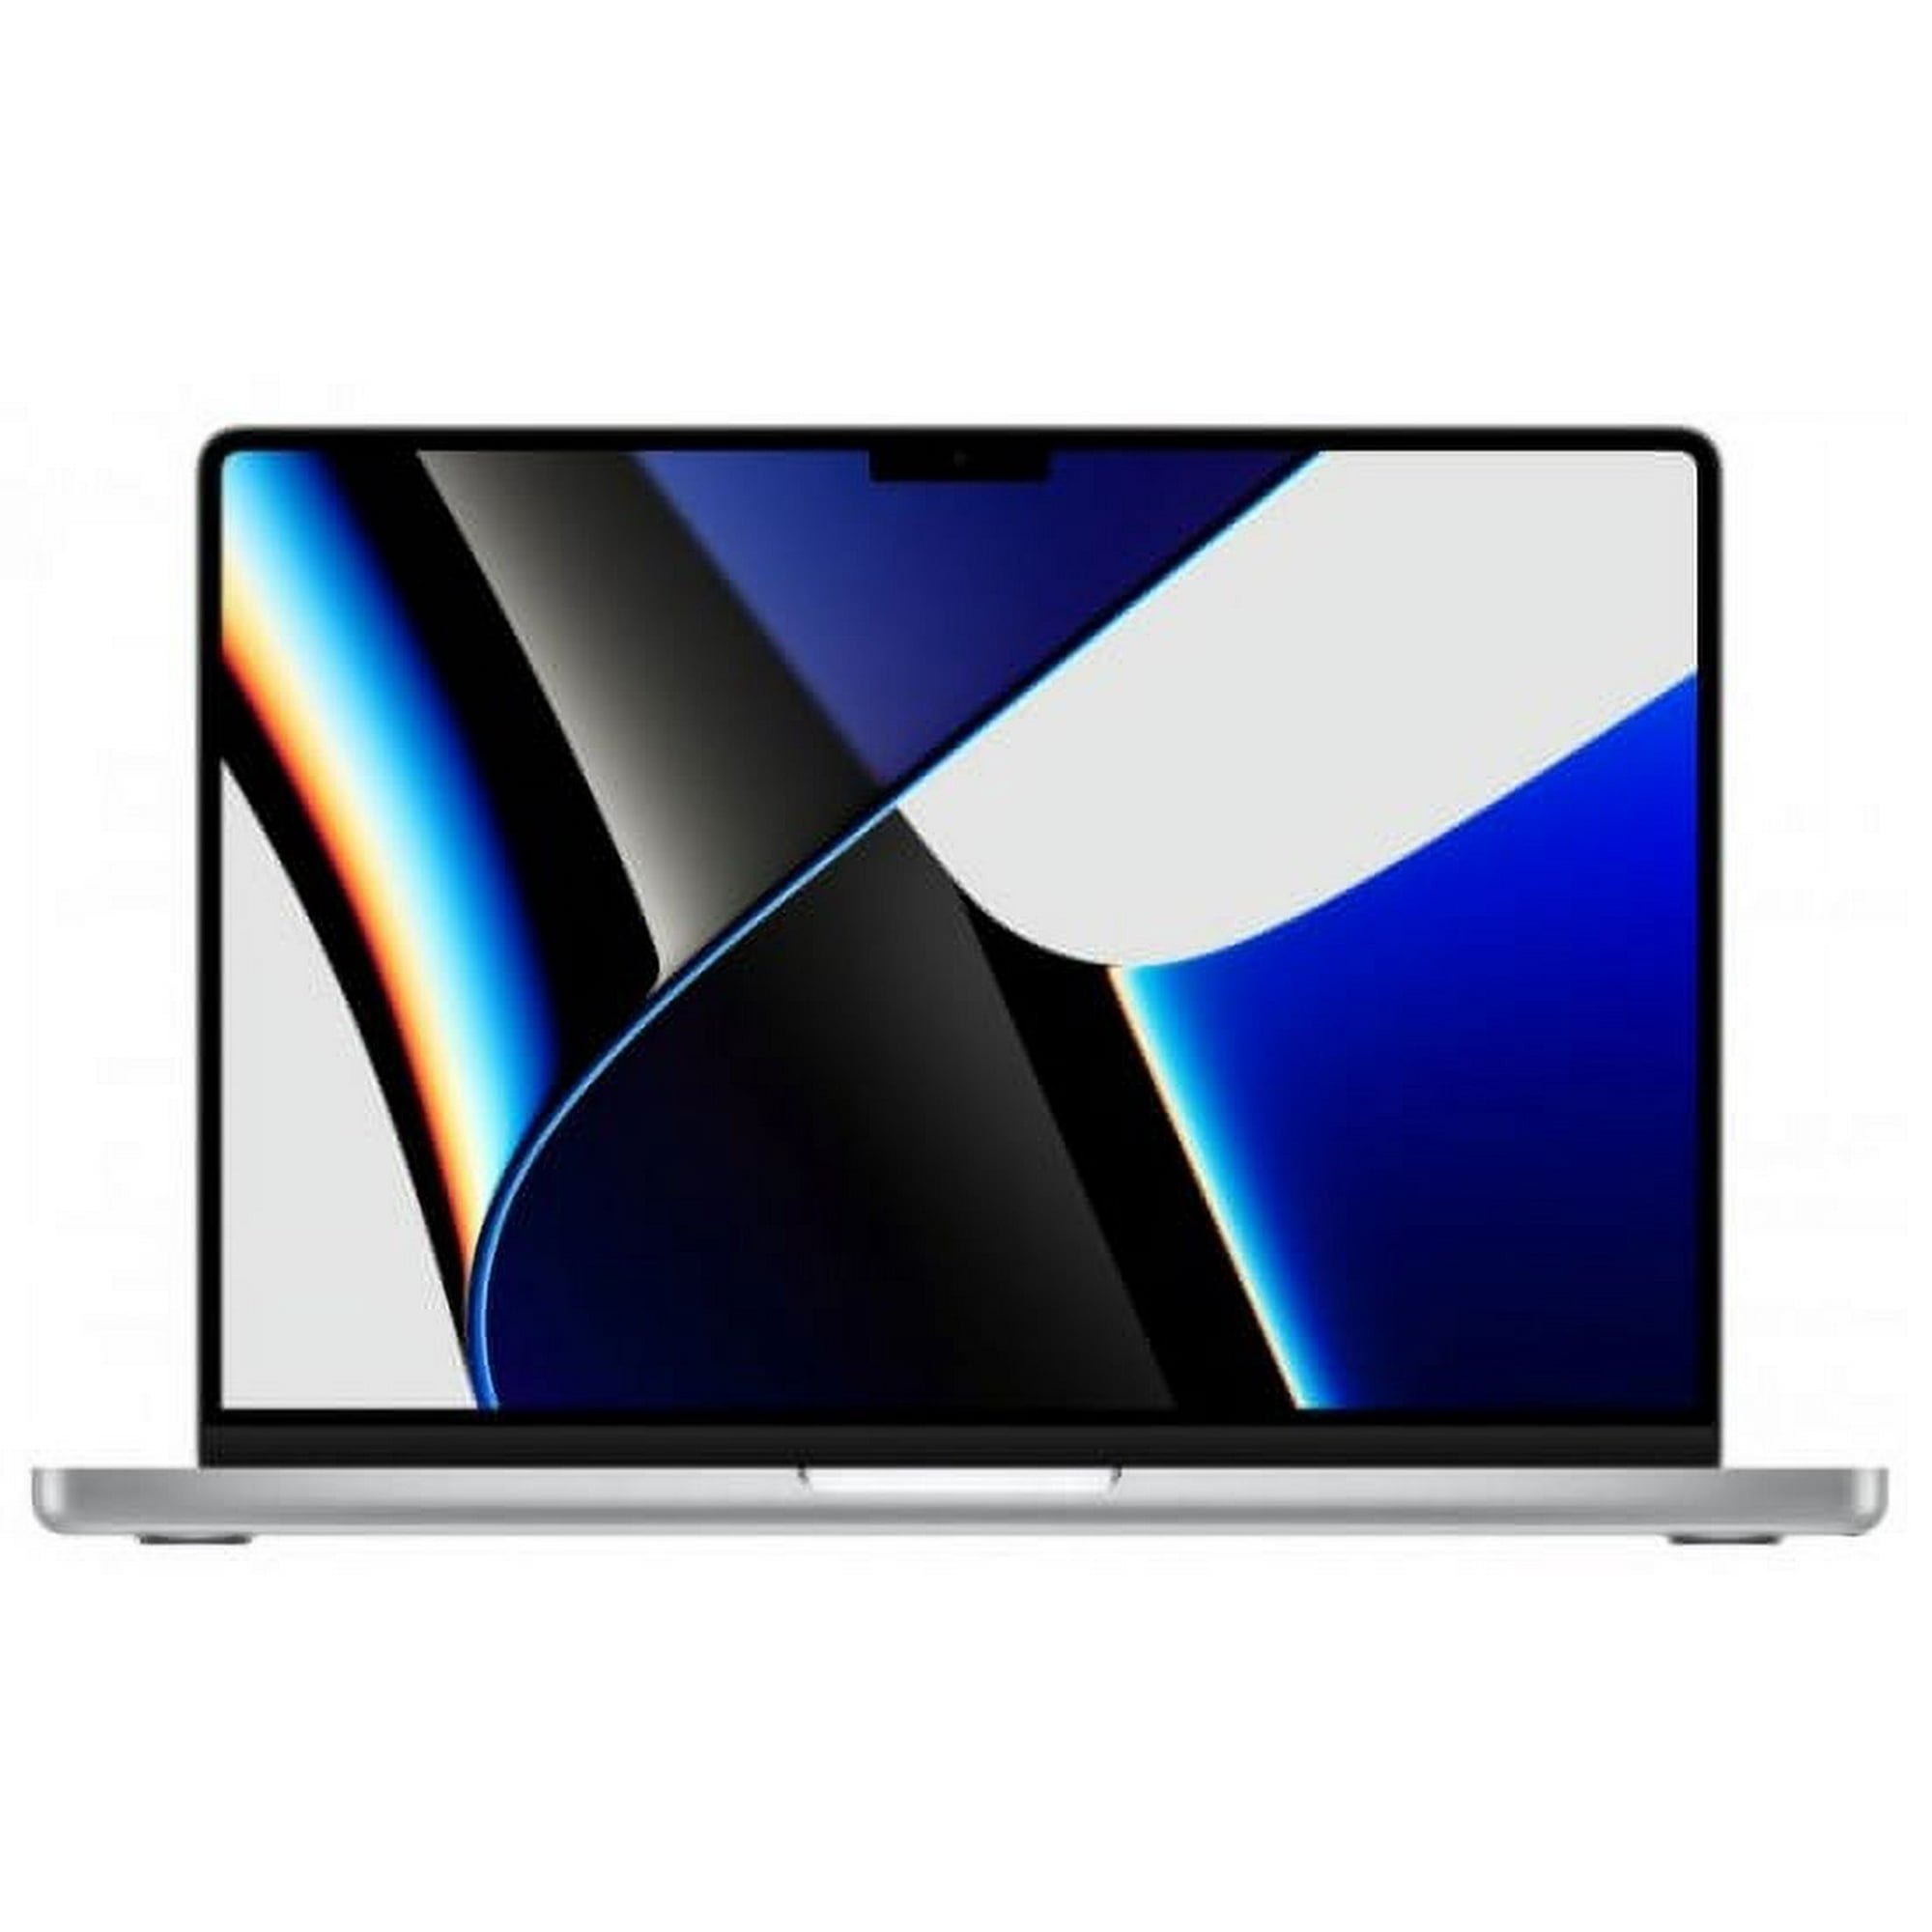 Apple MacBook Pro (14-inch, Apple M1 Pro chip with 10-core CPU and